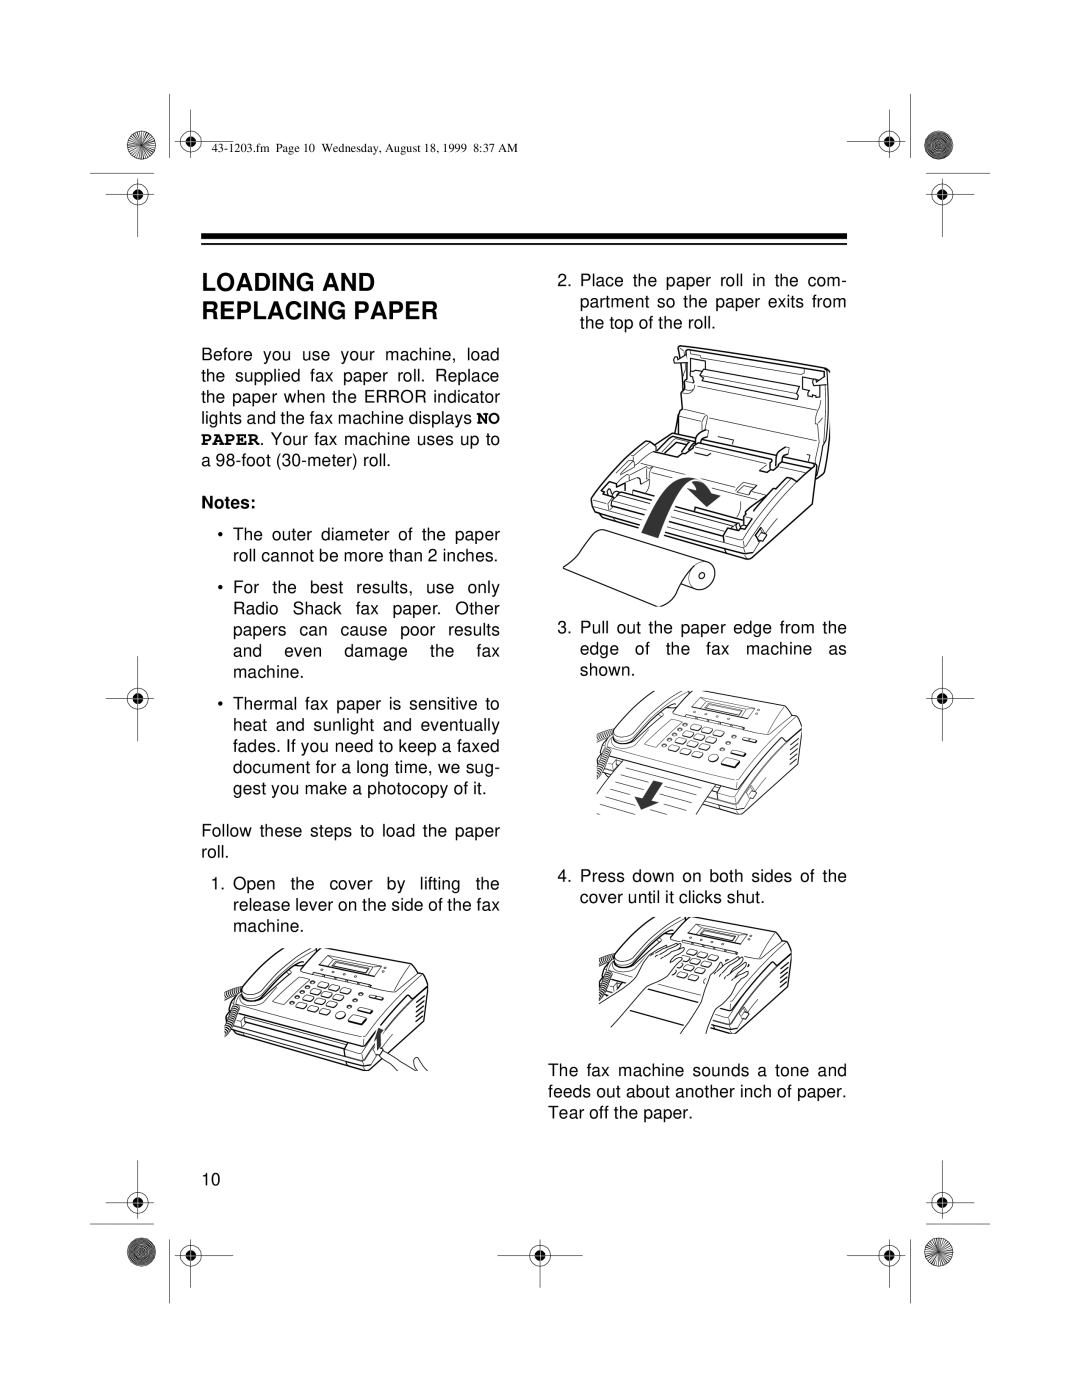 Radio Shack TFX-1031 owner manual Loading And Replacing Paper 